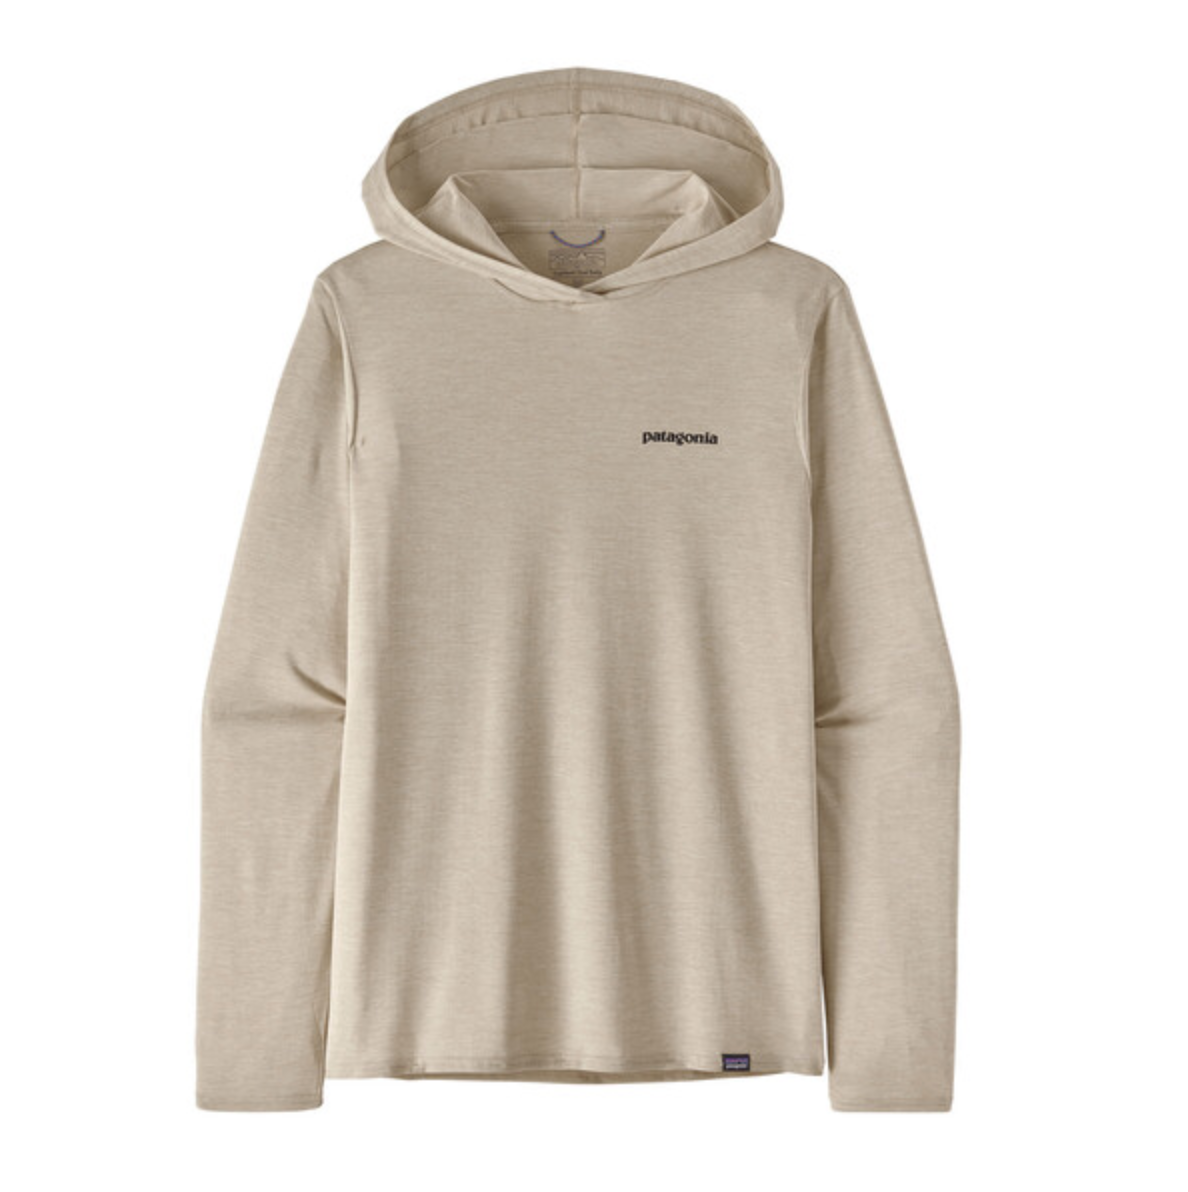 Patagonia Men's Capilene Cool Daily Graphic Hoody - Fitz Roy Trout: Pumice X-Dye